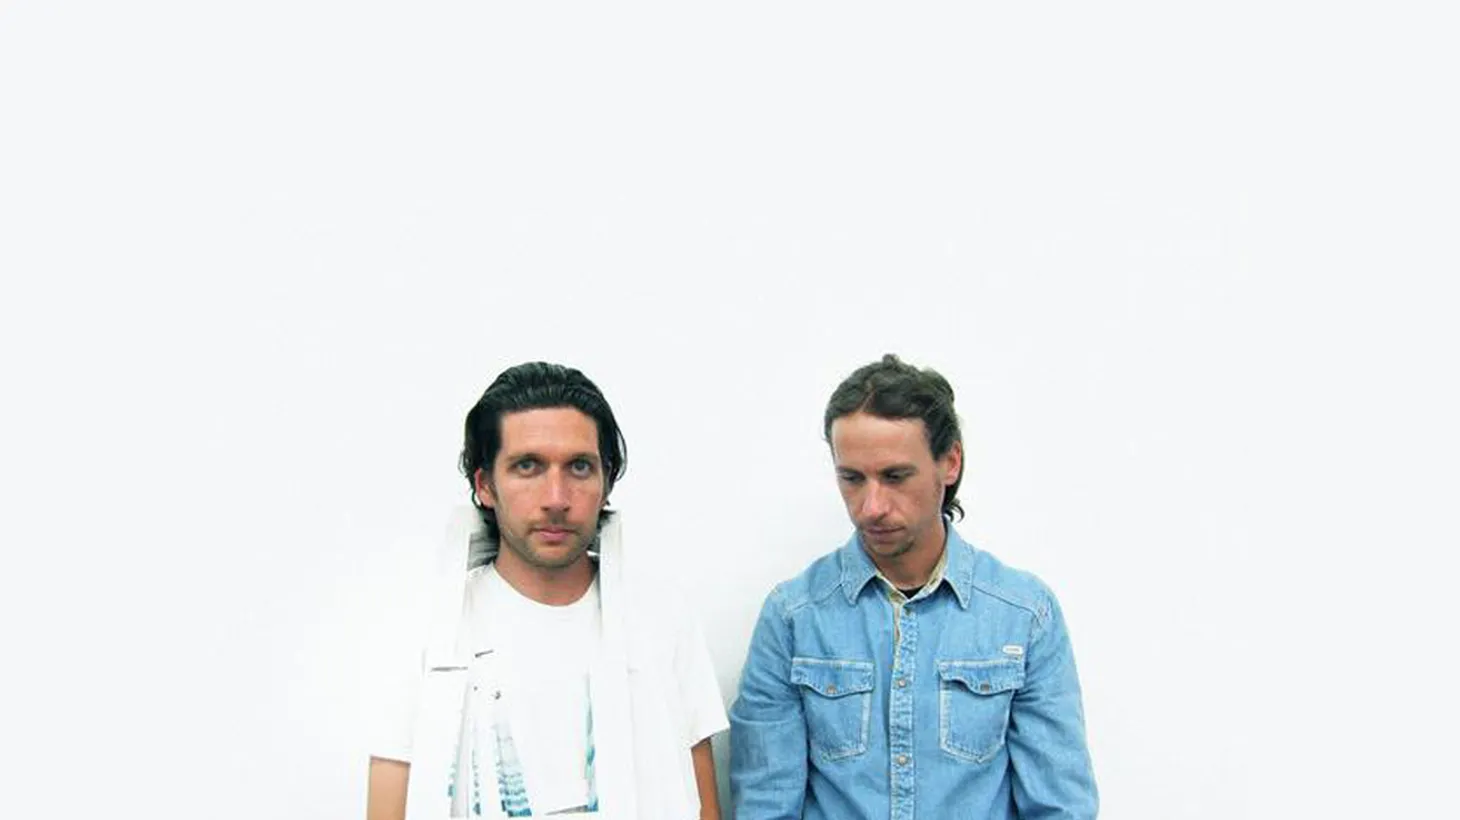 LA punk duo No Age visited our studio around the release date for their album, An Object, on Sub Pop Records.